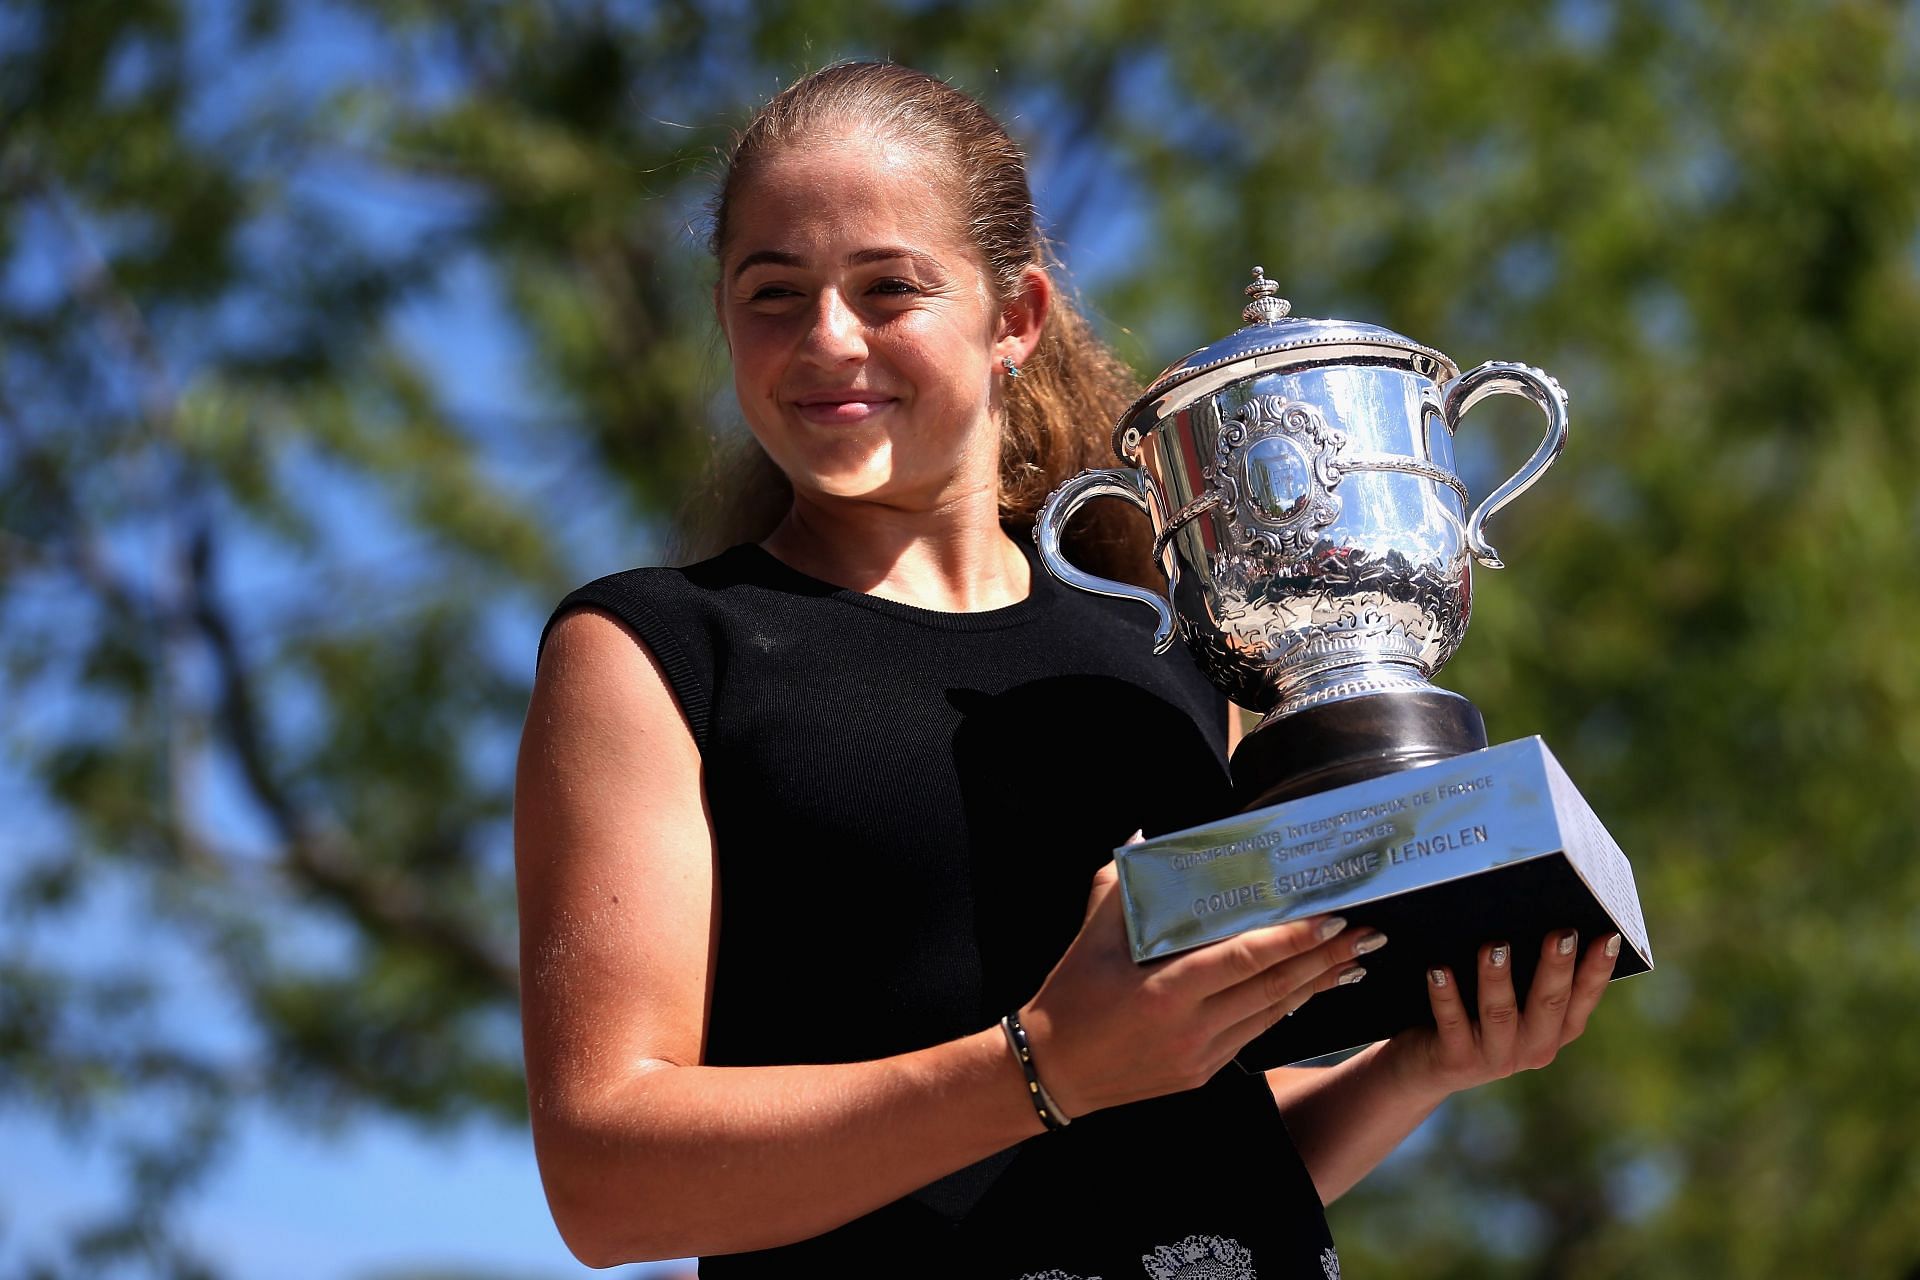 Jelena Ostapenko won the 2017 French Open just after turning 20